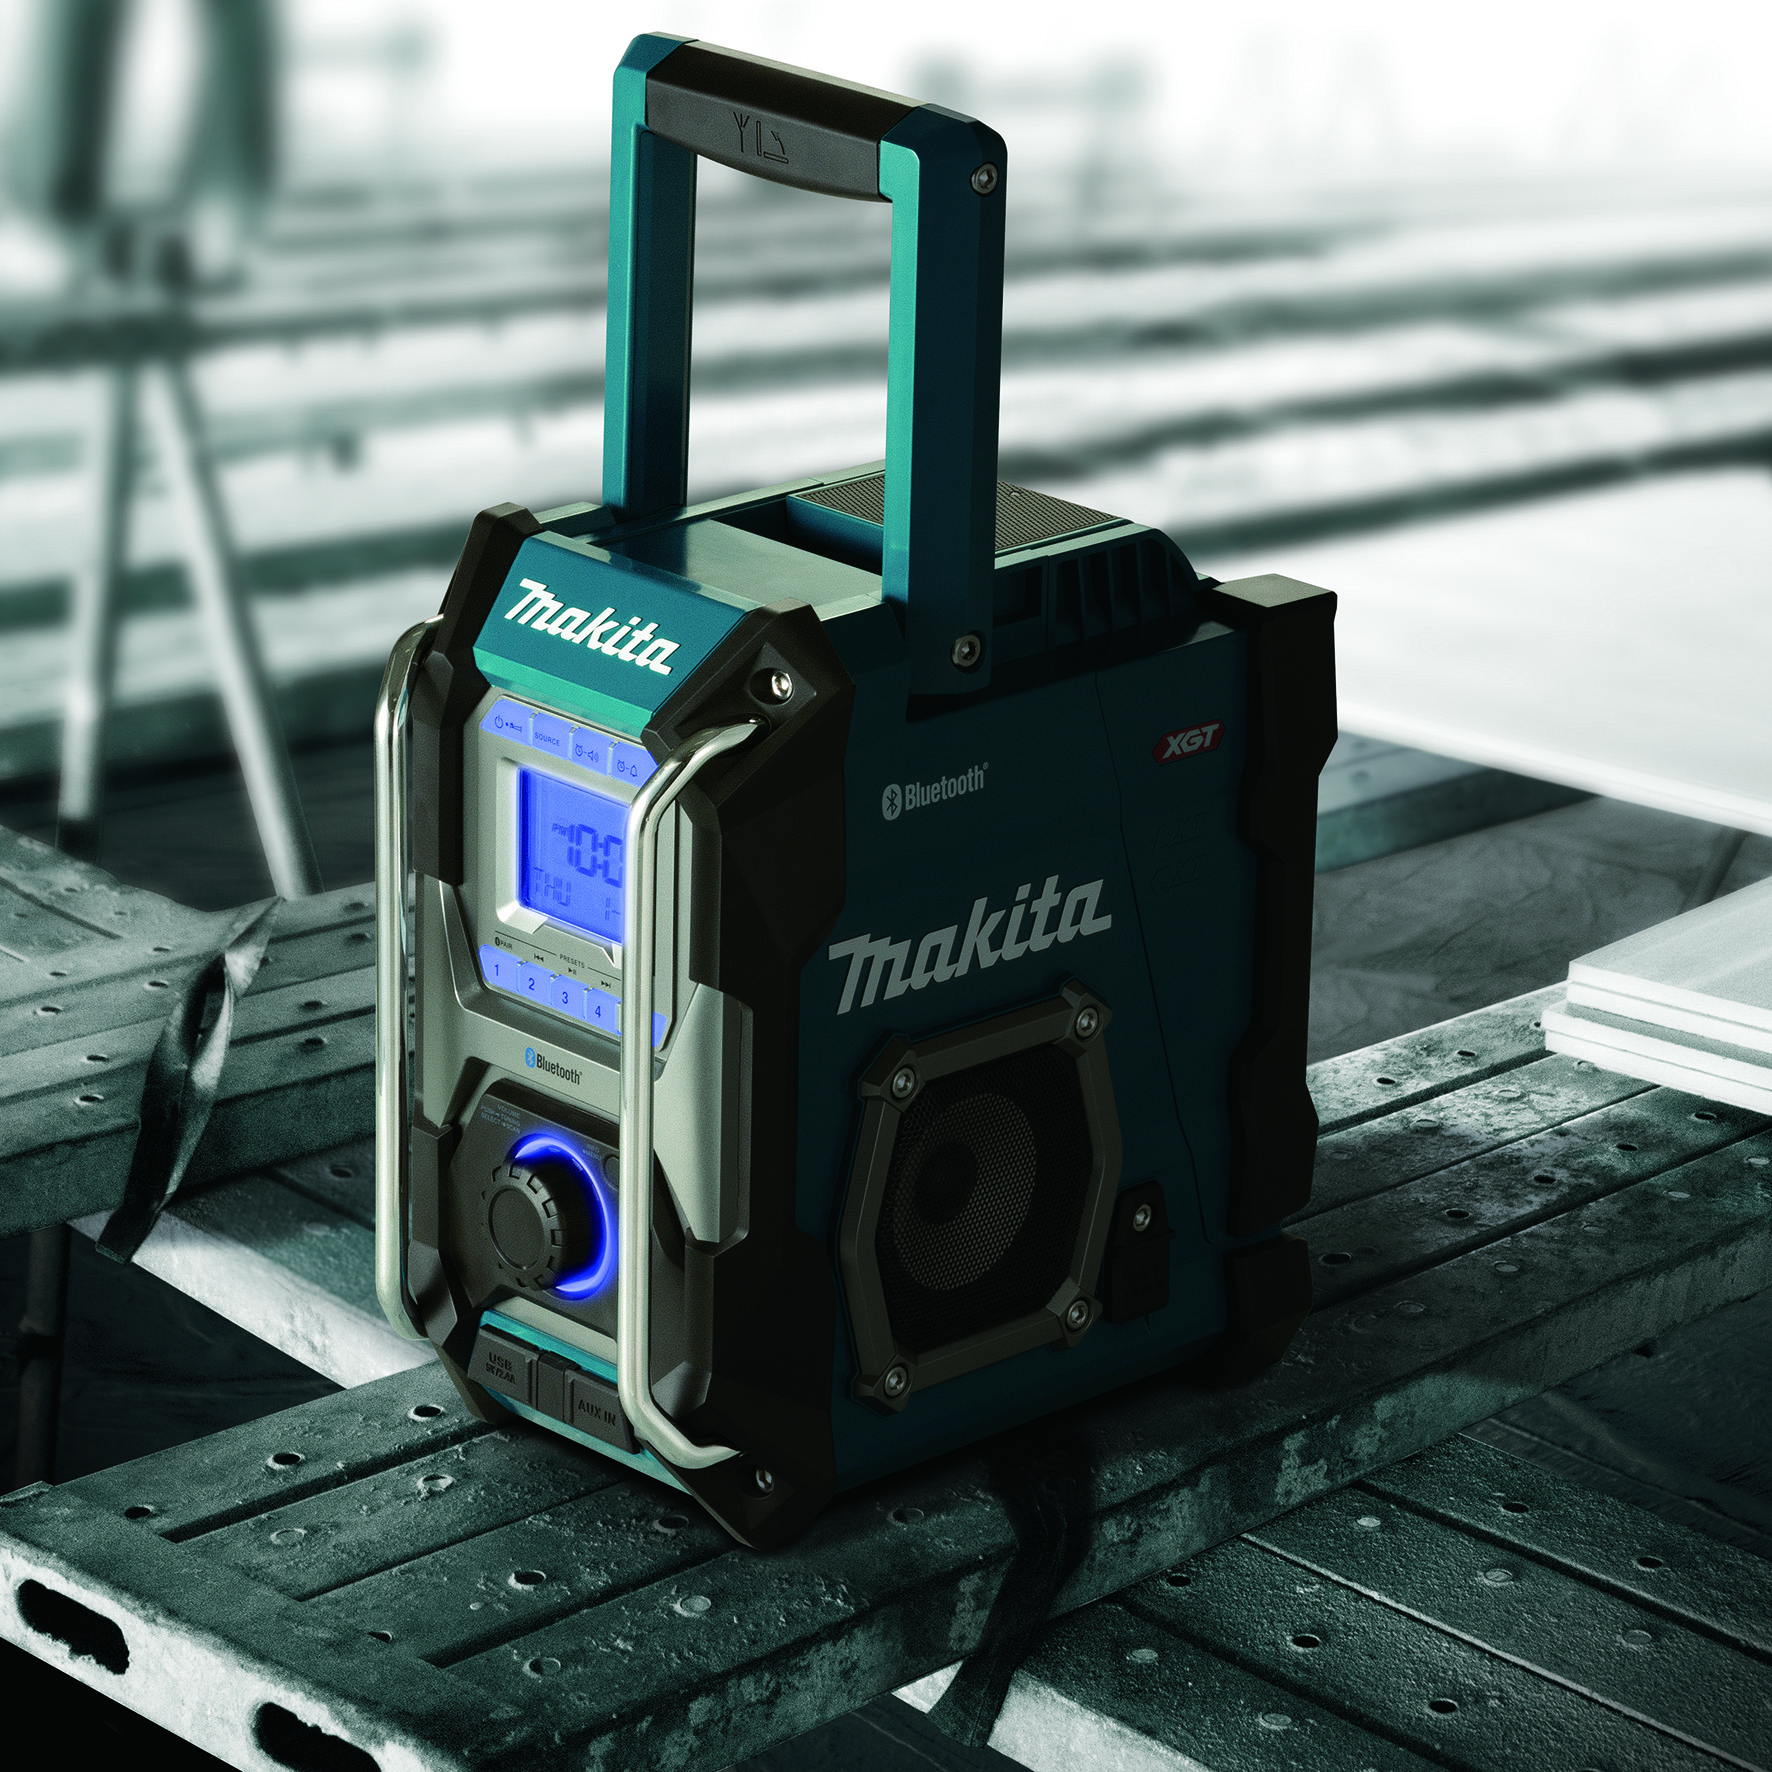 Makita launches latest promotion with a free radio